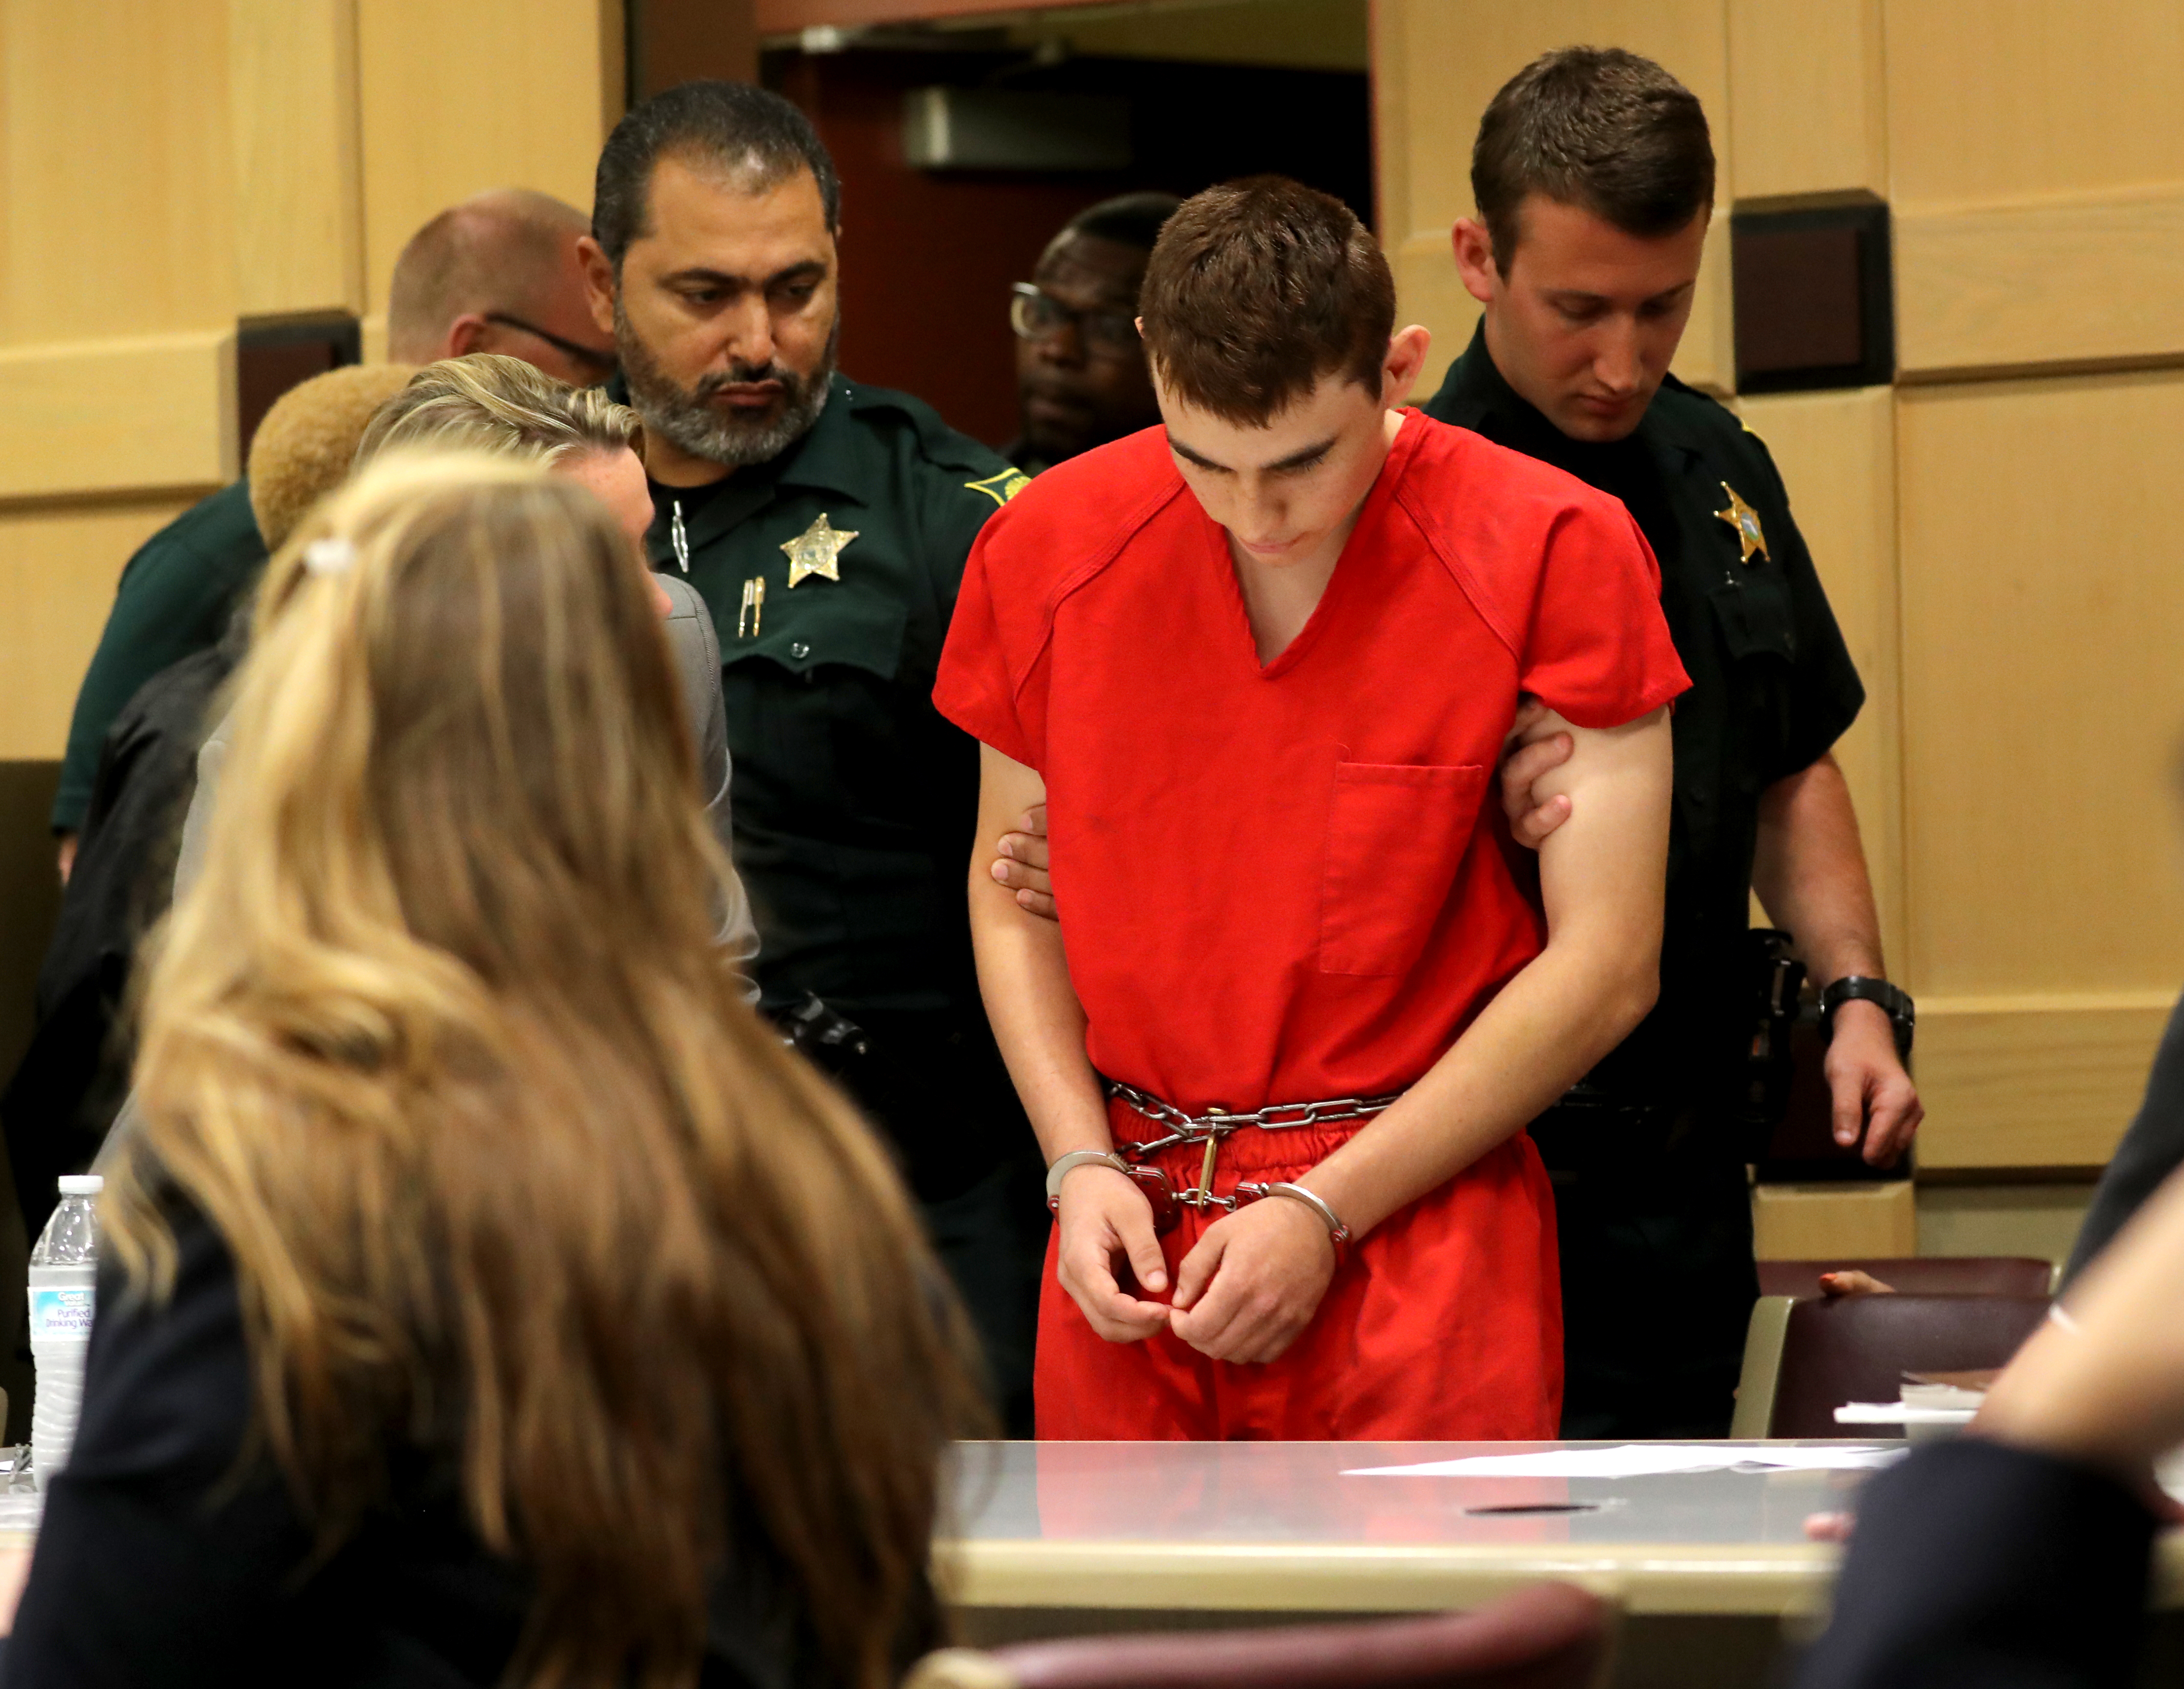 FT. LAUDERDALE - FEBRUARY 19: Nikolas Cruz appears in court for a status hearing before Broward Circuit Judge Elizabeth Scherer on February 19, 2018 in Ft. Lauderdale, Florida. (Photo by Mike Stocker-Pool/Getty Images) (Pool—Getty Images)